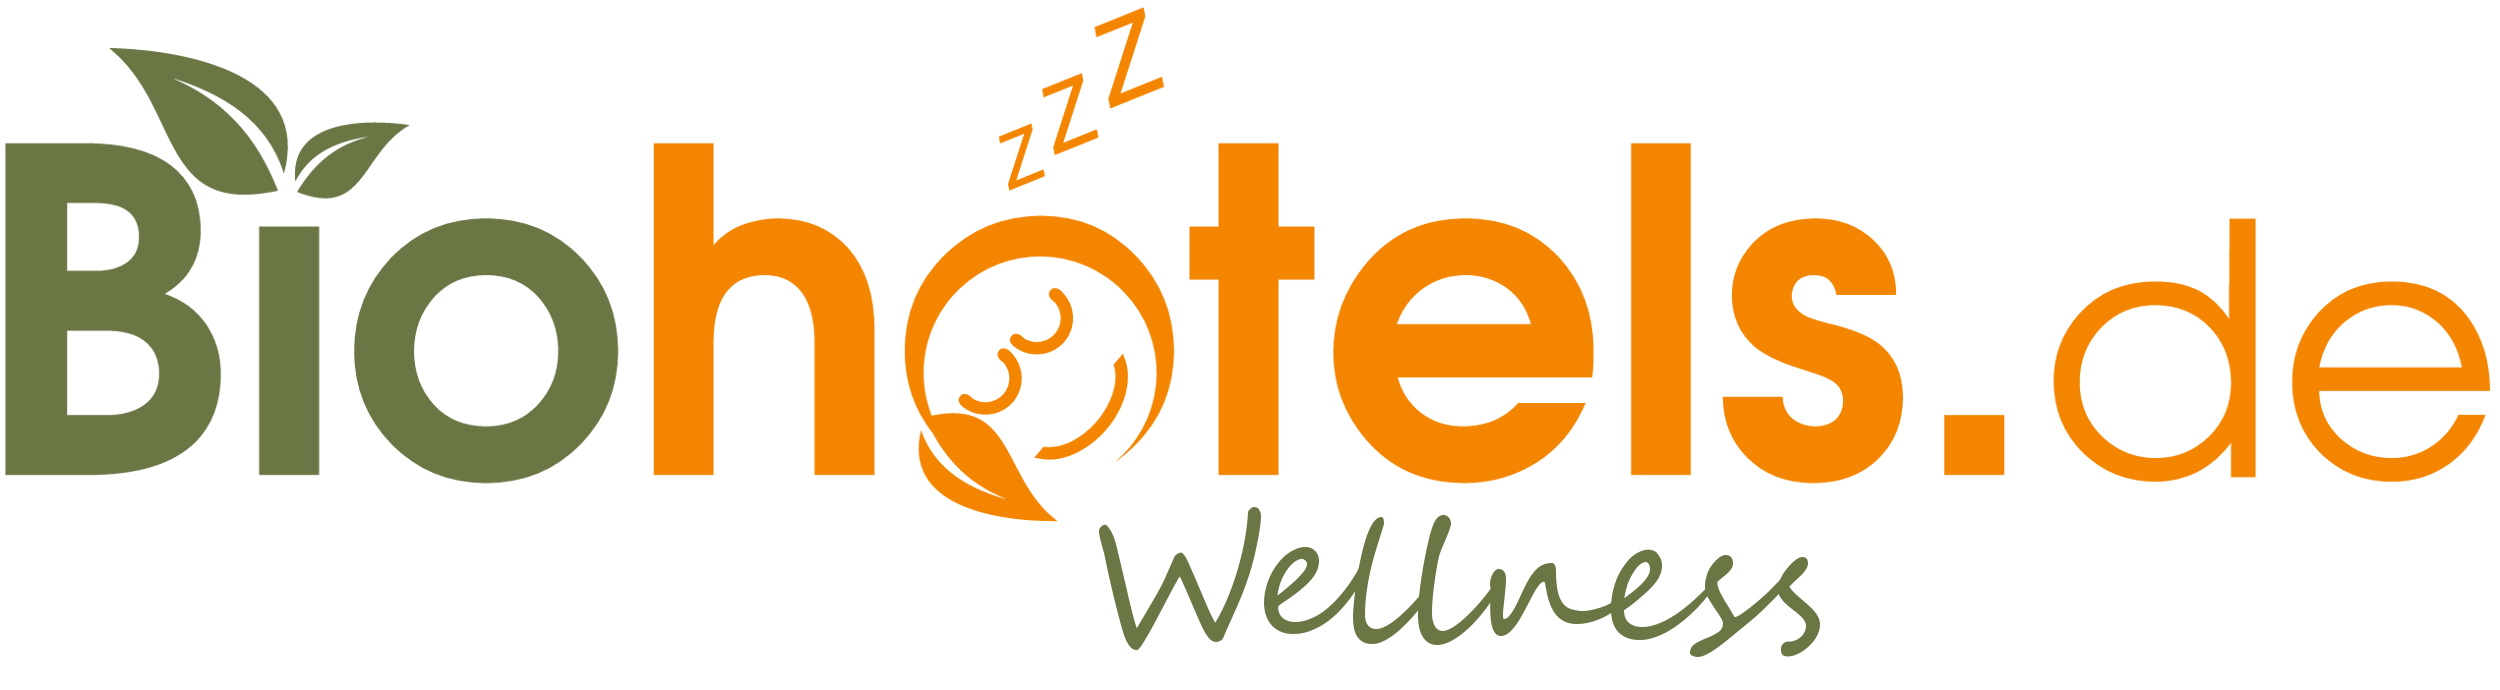 Organic hotels with wellness